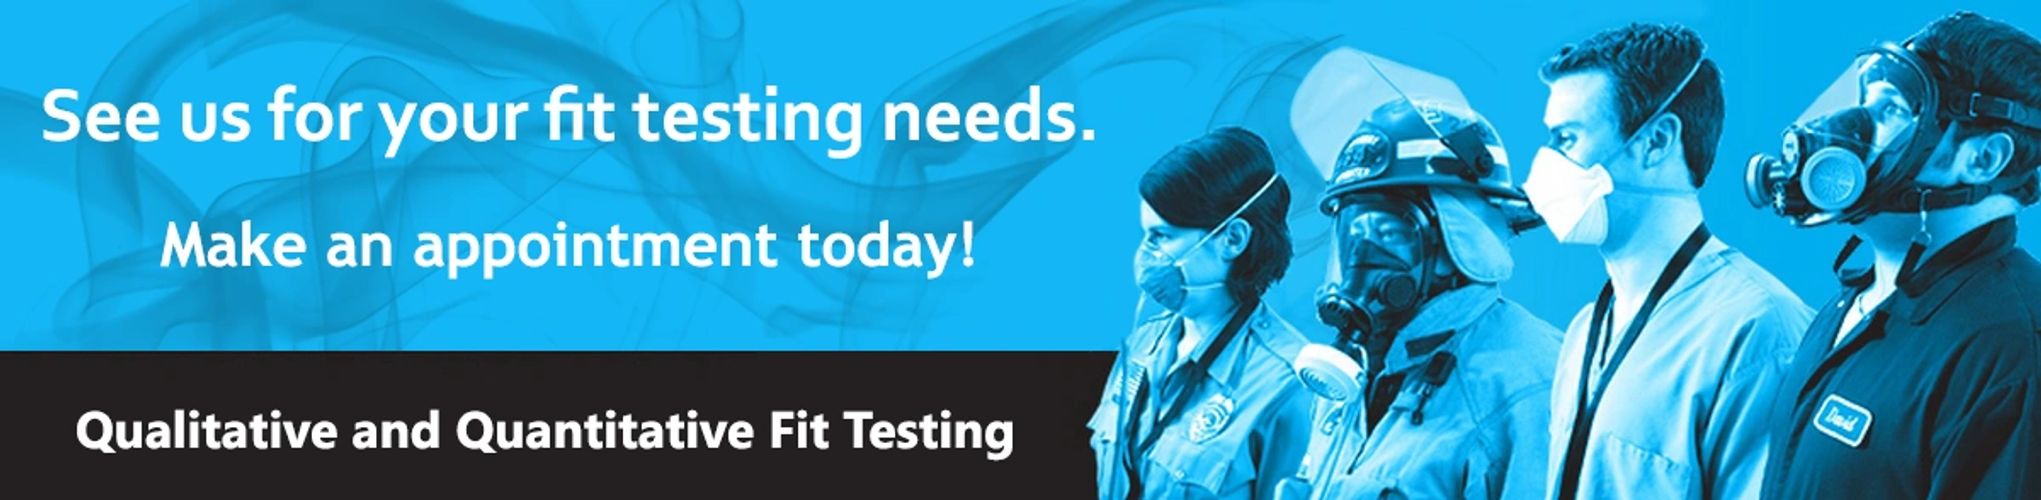 See us for you fit testing needs.  Make an appointment today! Qualitative & Quantitative Fit Testing